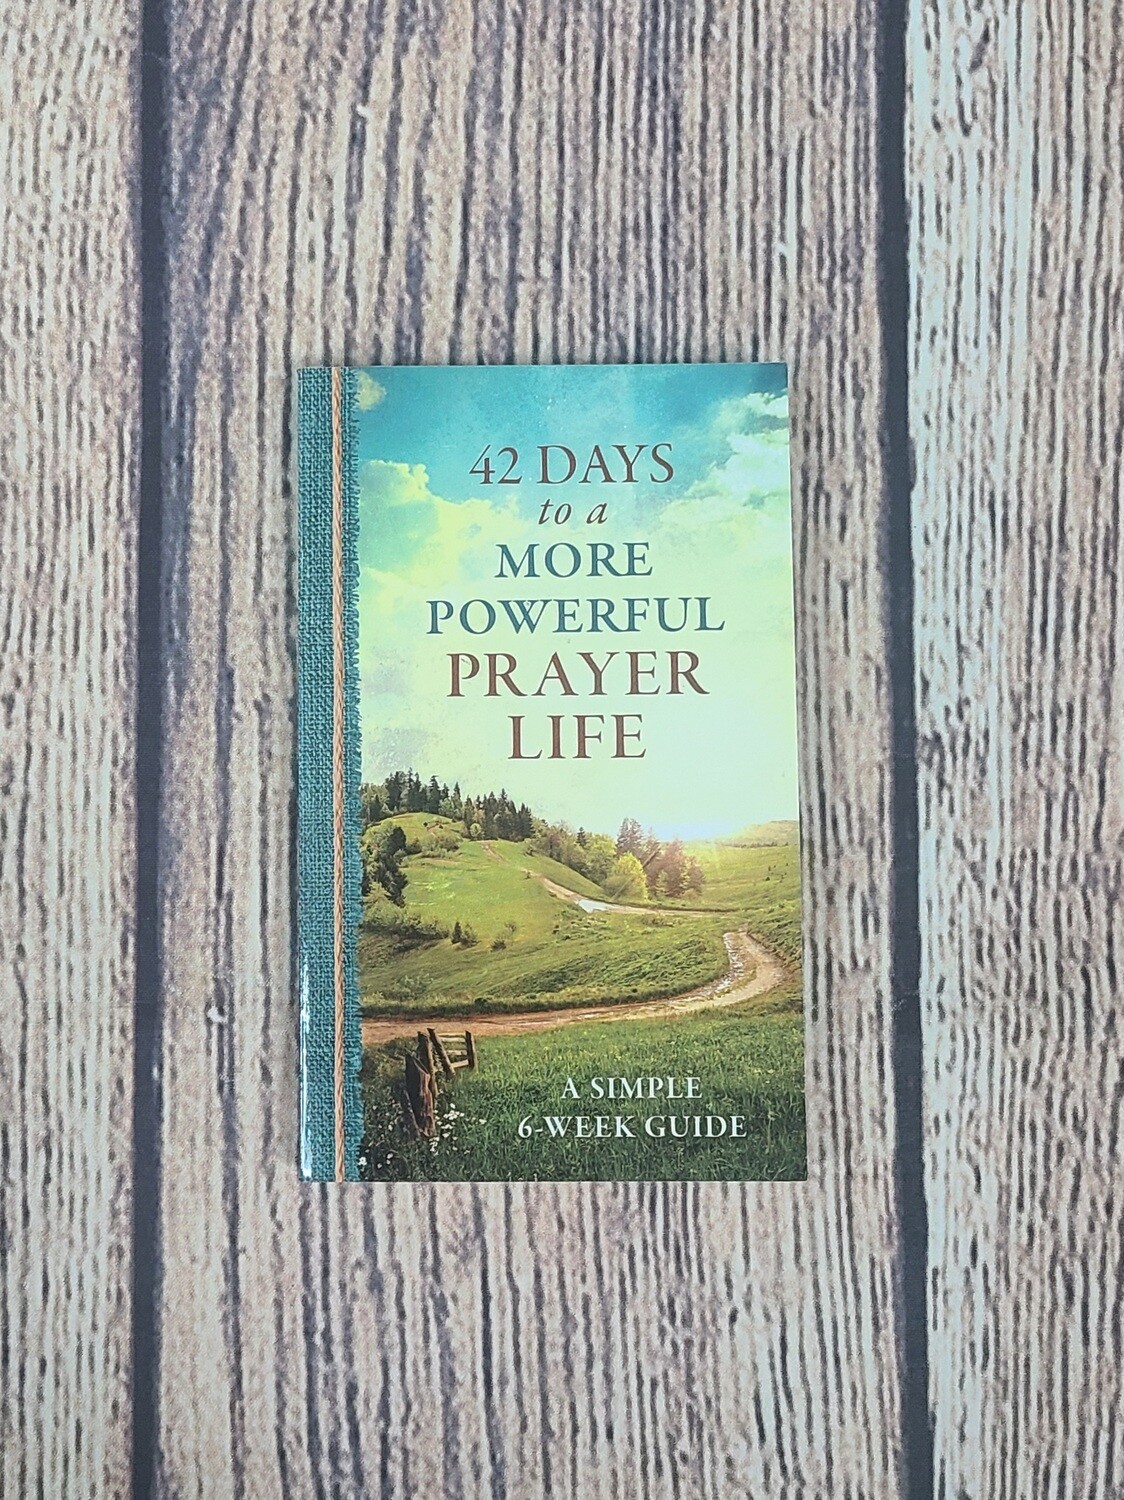 42 Days to a More Powerful Prayer Life by Glenn Hascall